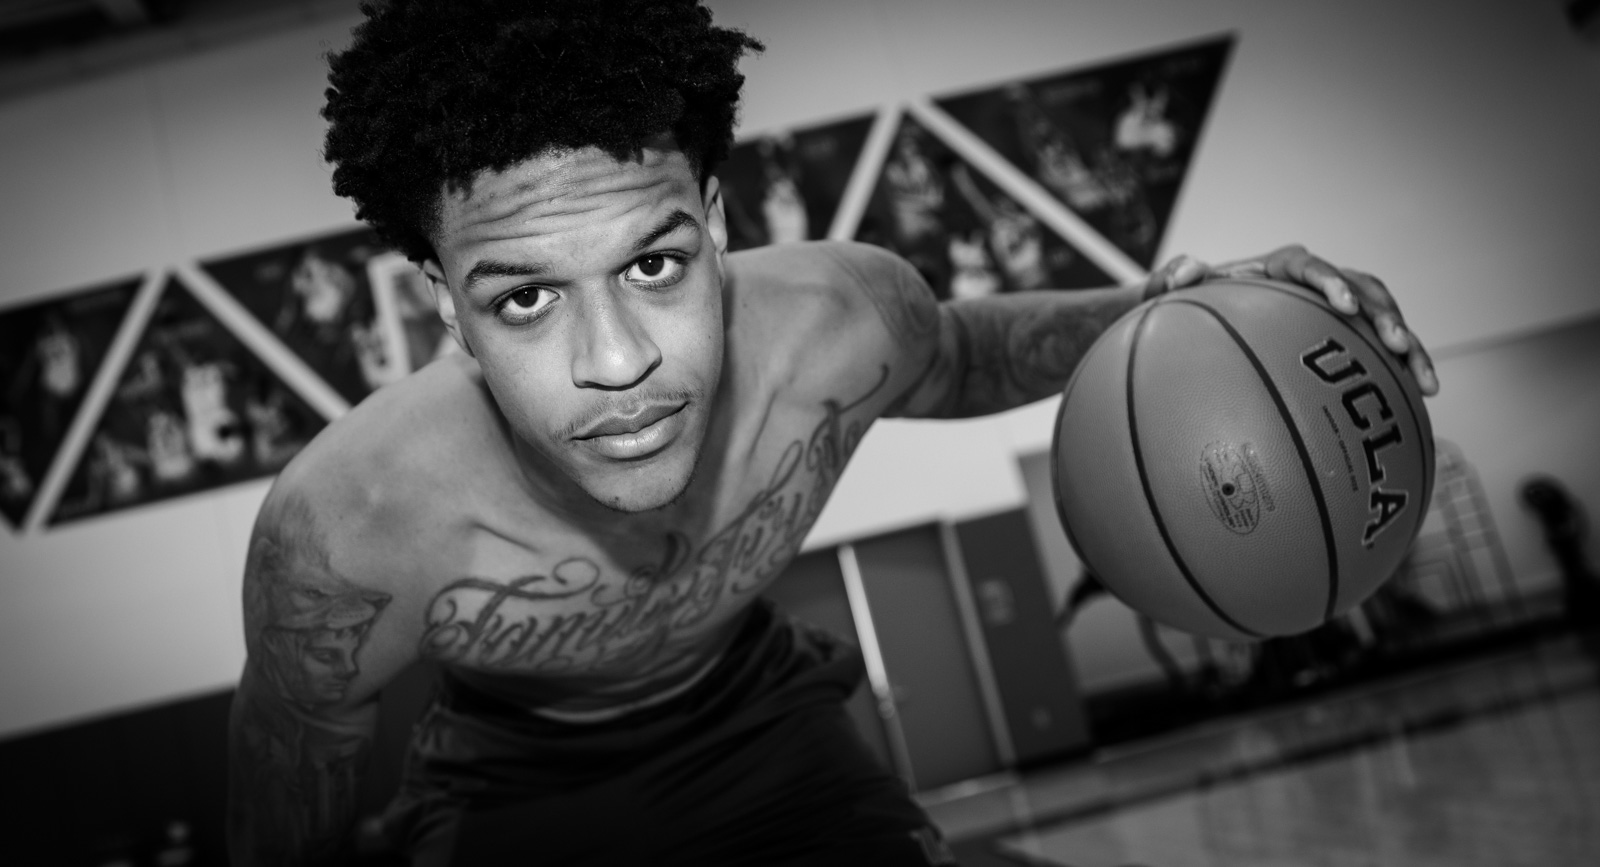 Shareef O'Neal's tattoos paint pictures of personal journey, allow self-expression - Daily Bruin